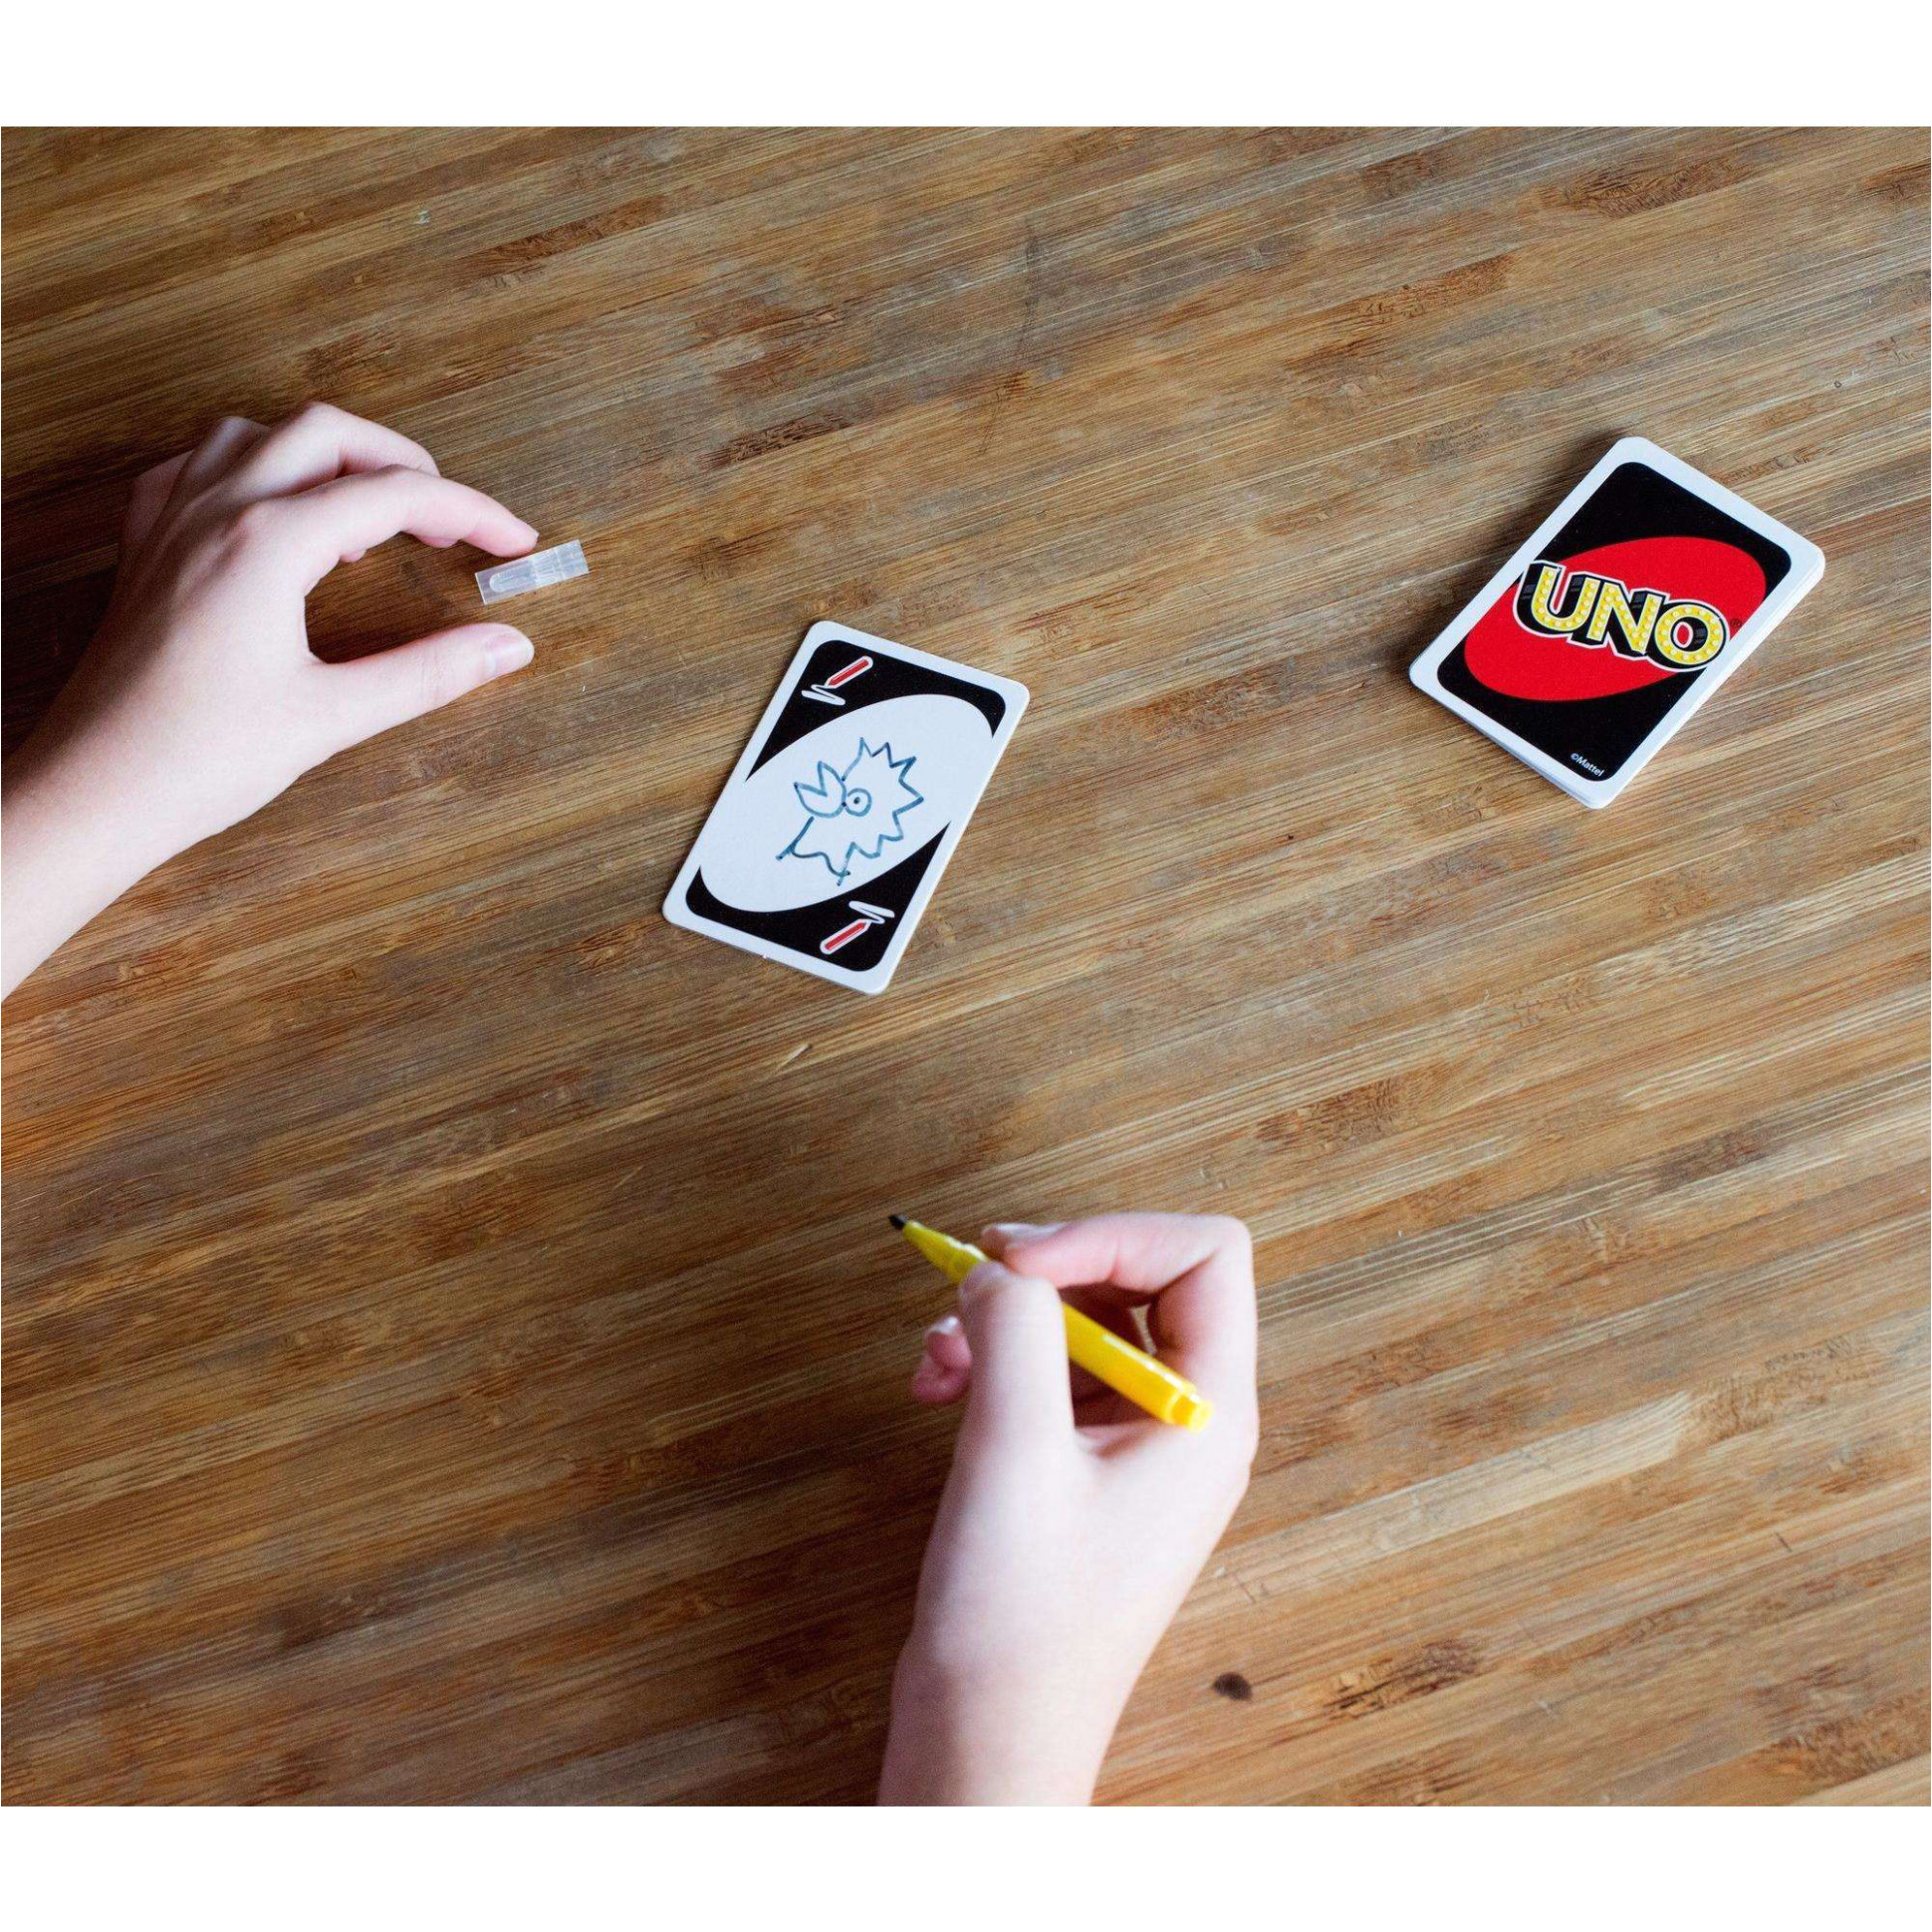 uno wild jackpot card game with wild roller for 15 to 15 players ages 15 years and older jpeg